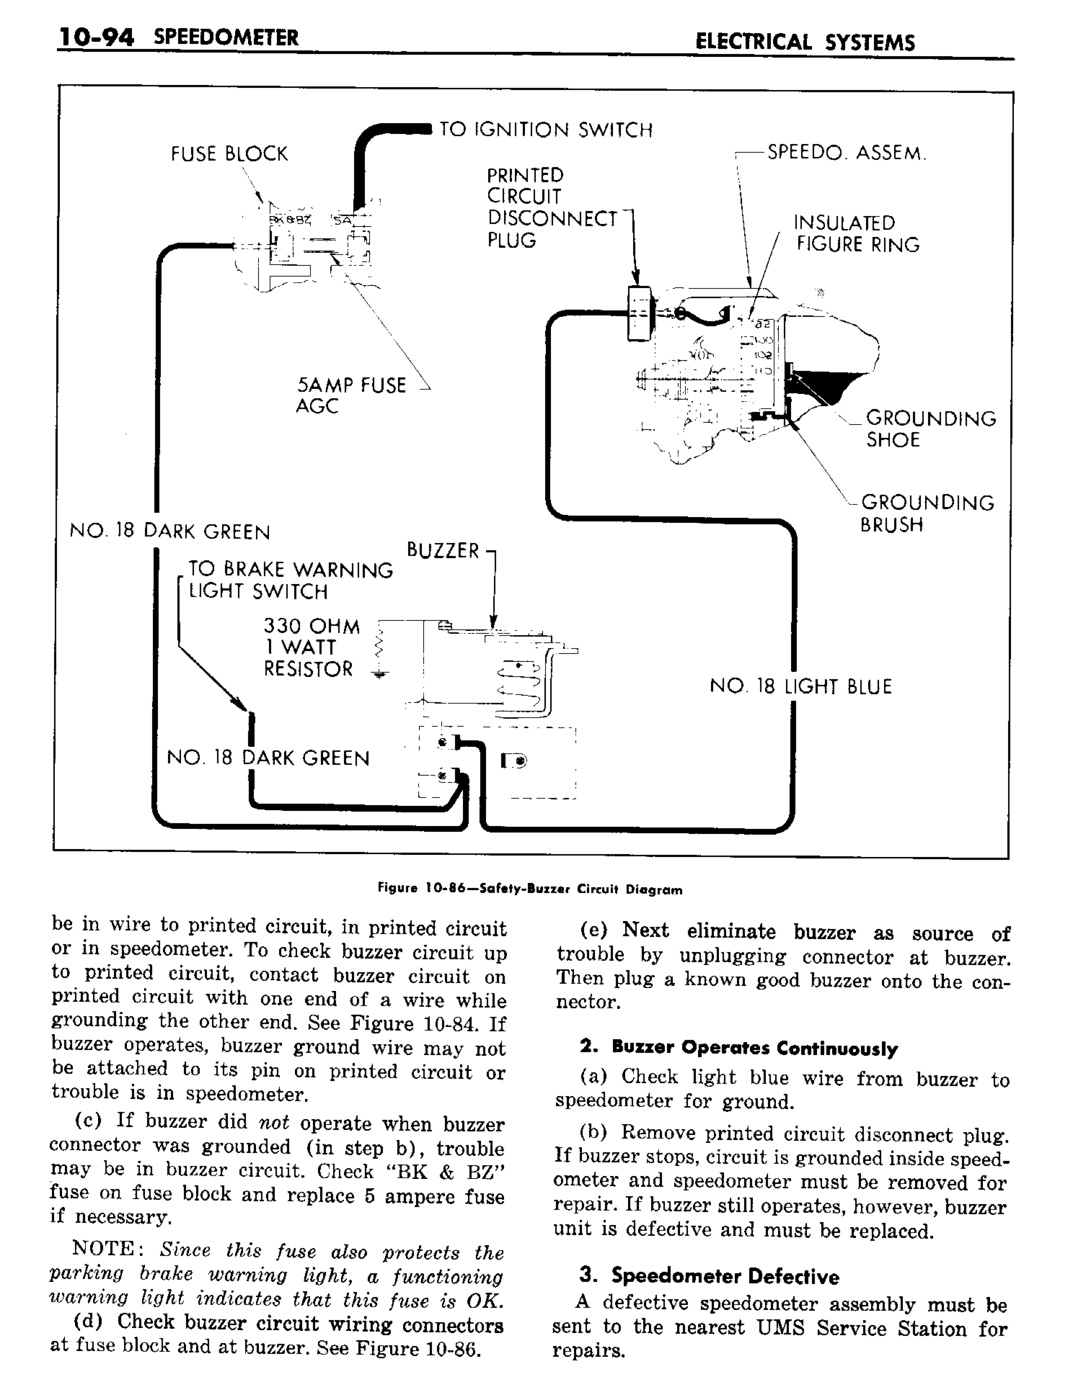 n_11 1960 Buick Shop Manual - Electrical Systems-094-094.jpg